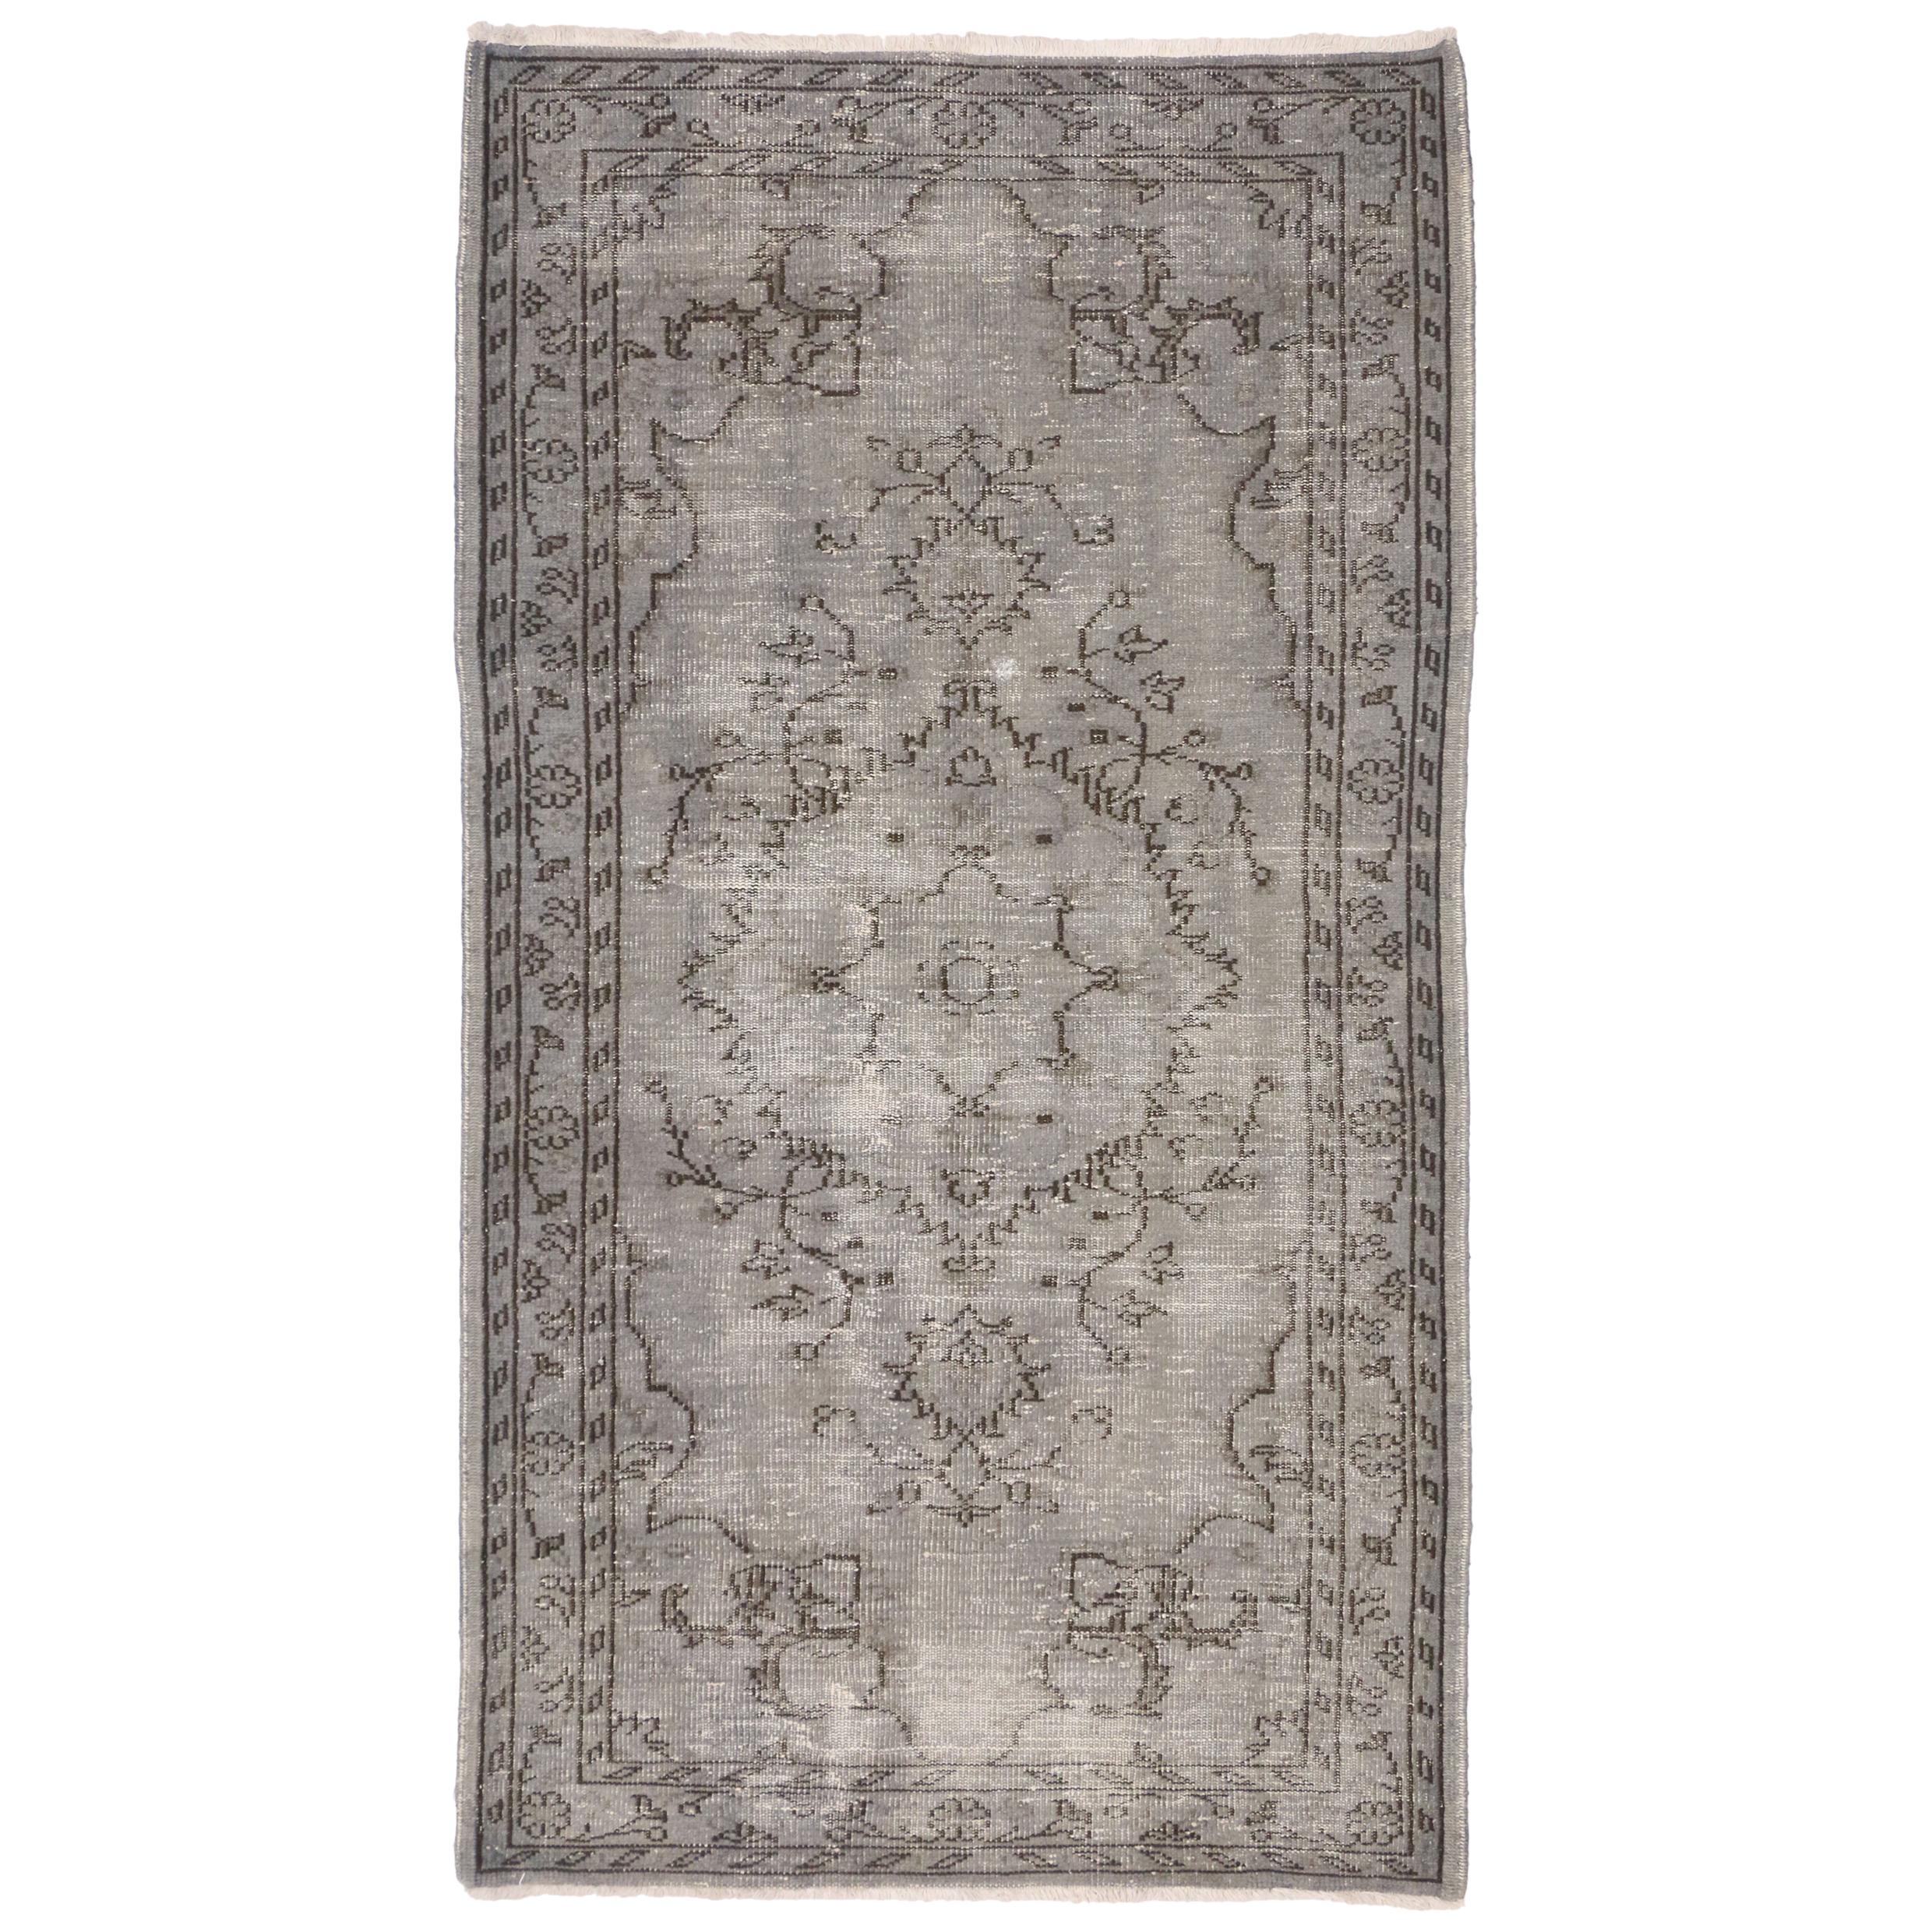 Distressed Vintage Turkish Overdyed Gray Rug with Feminine Industrial Style For Sale